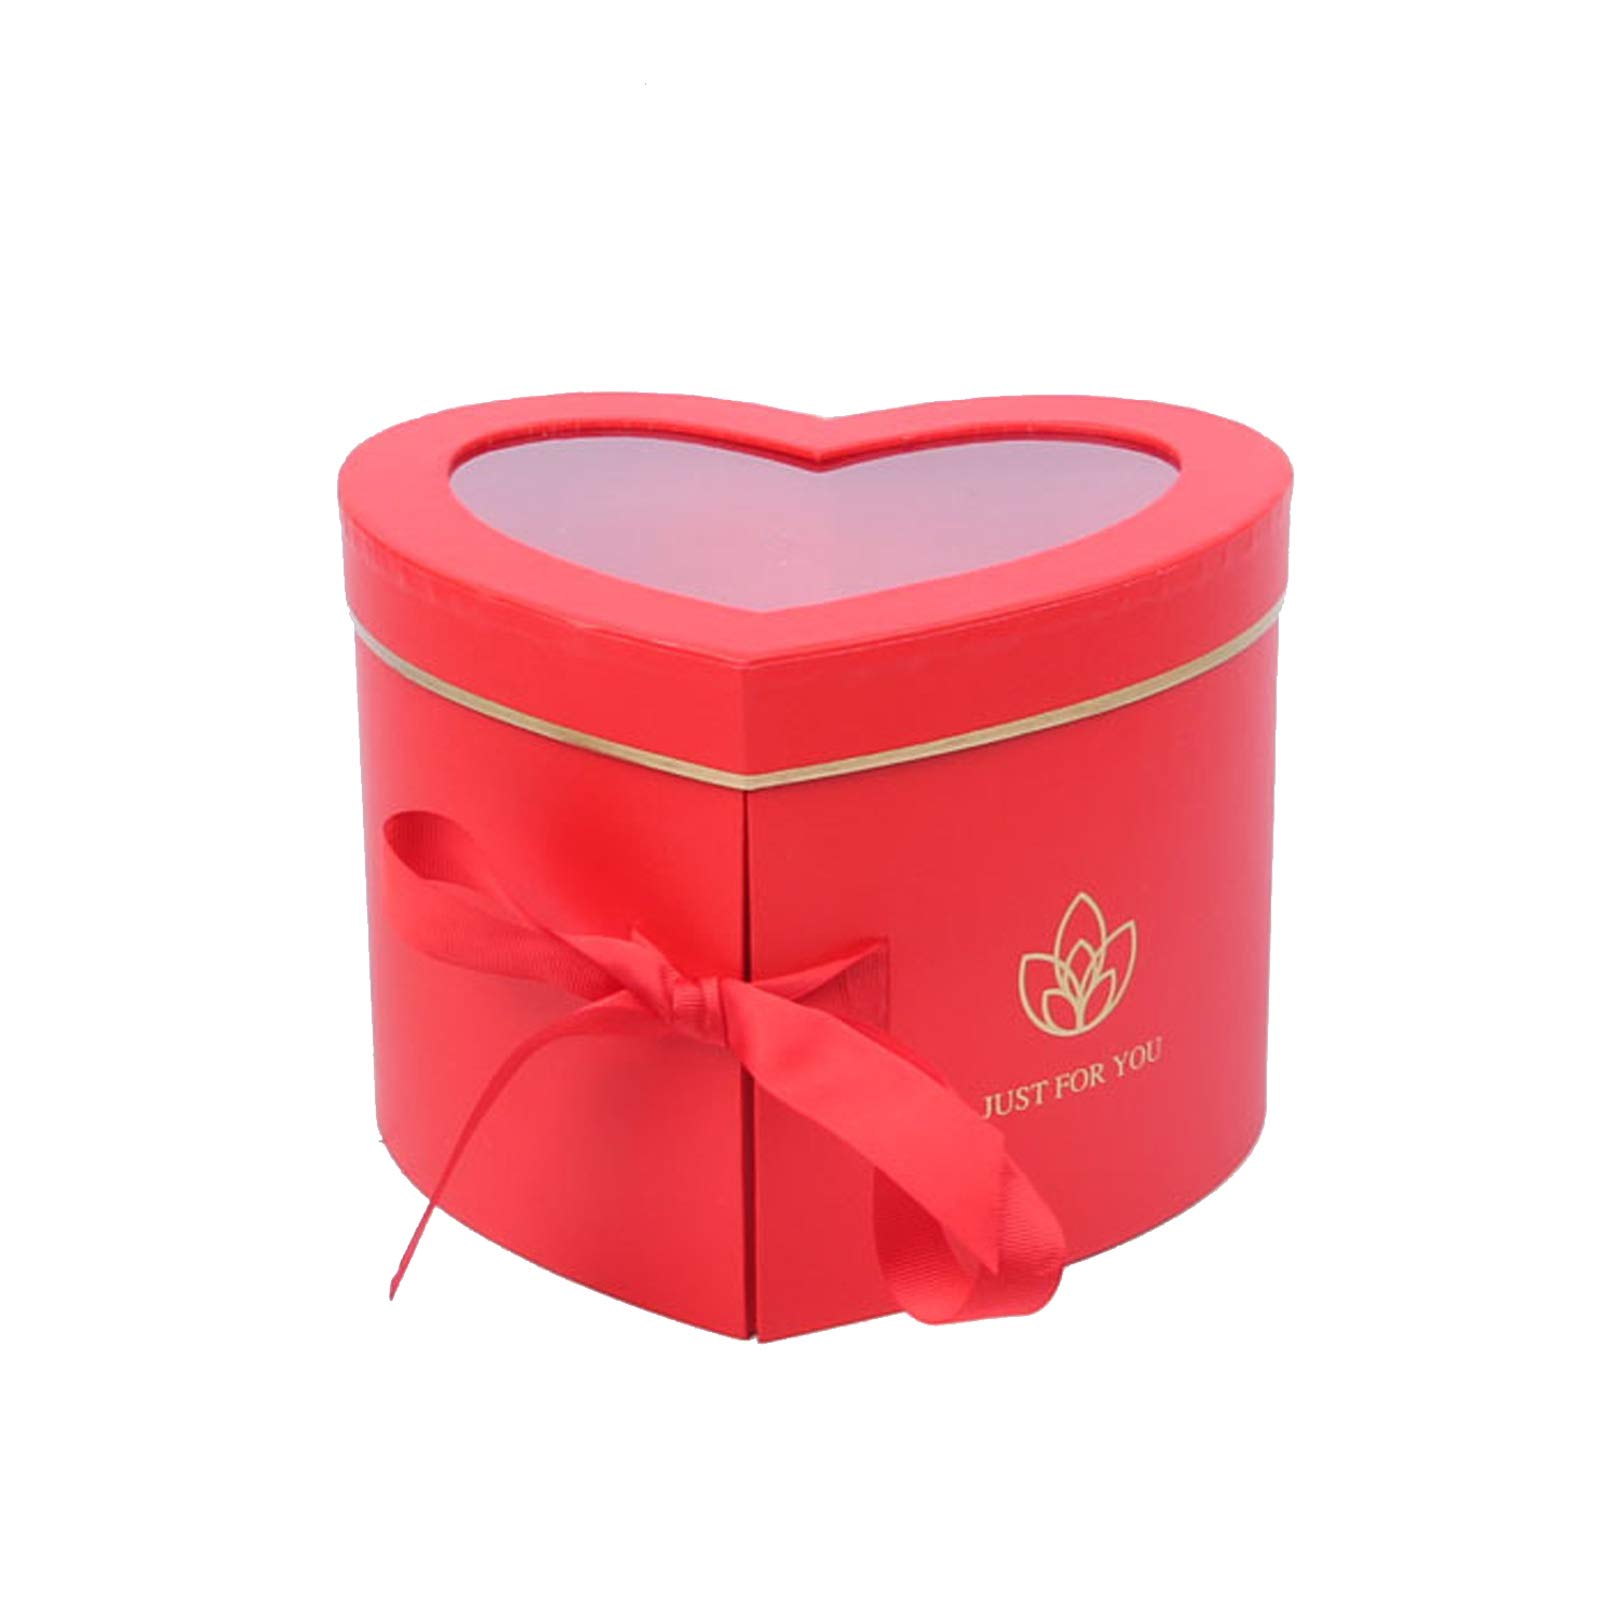 Xixcherg Heart-Shaped Paper Mache Boxes for Packaging Luxury Flower  Cardbord Boxes with Lids and Ribbons Ideal for Crafting & Storage  Accessories Cosmetics Jewelry Gifts Home (Red)